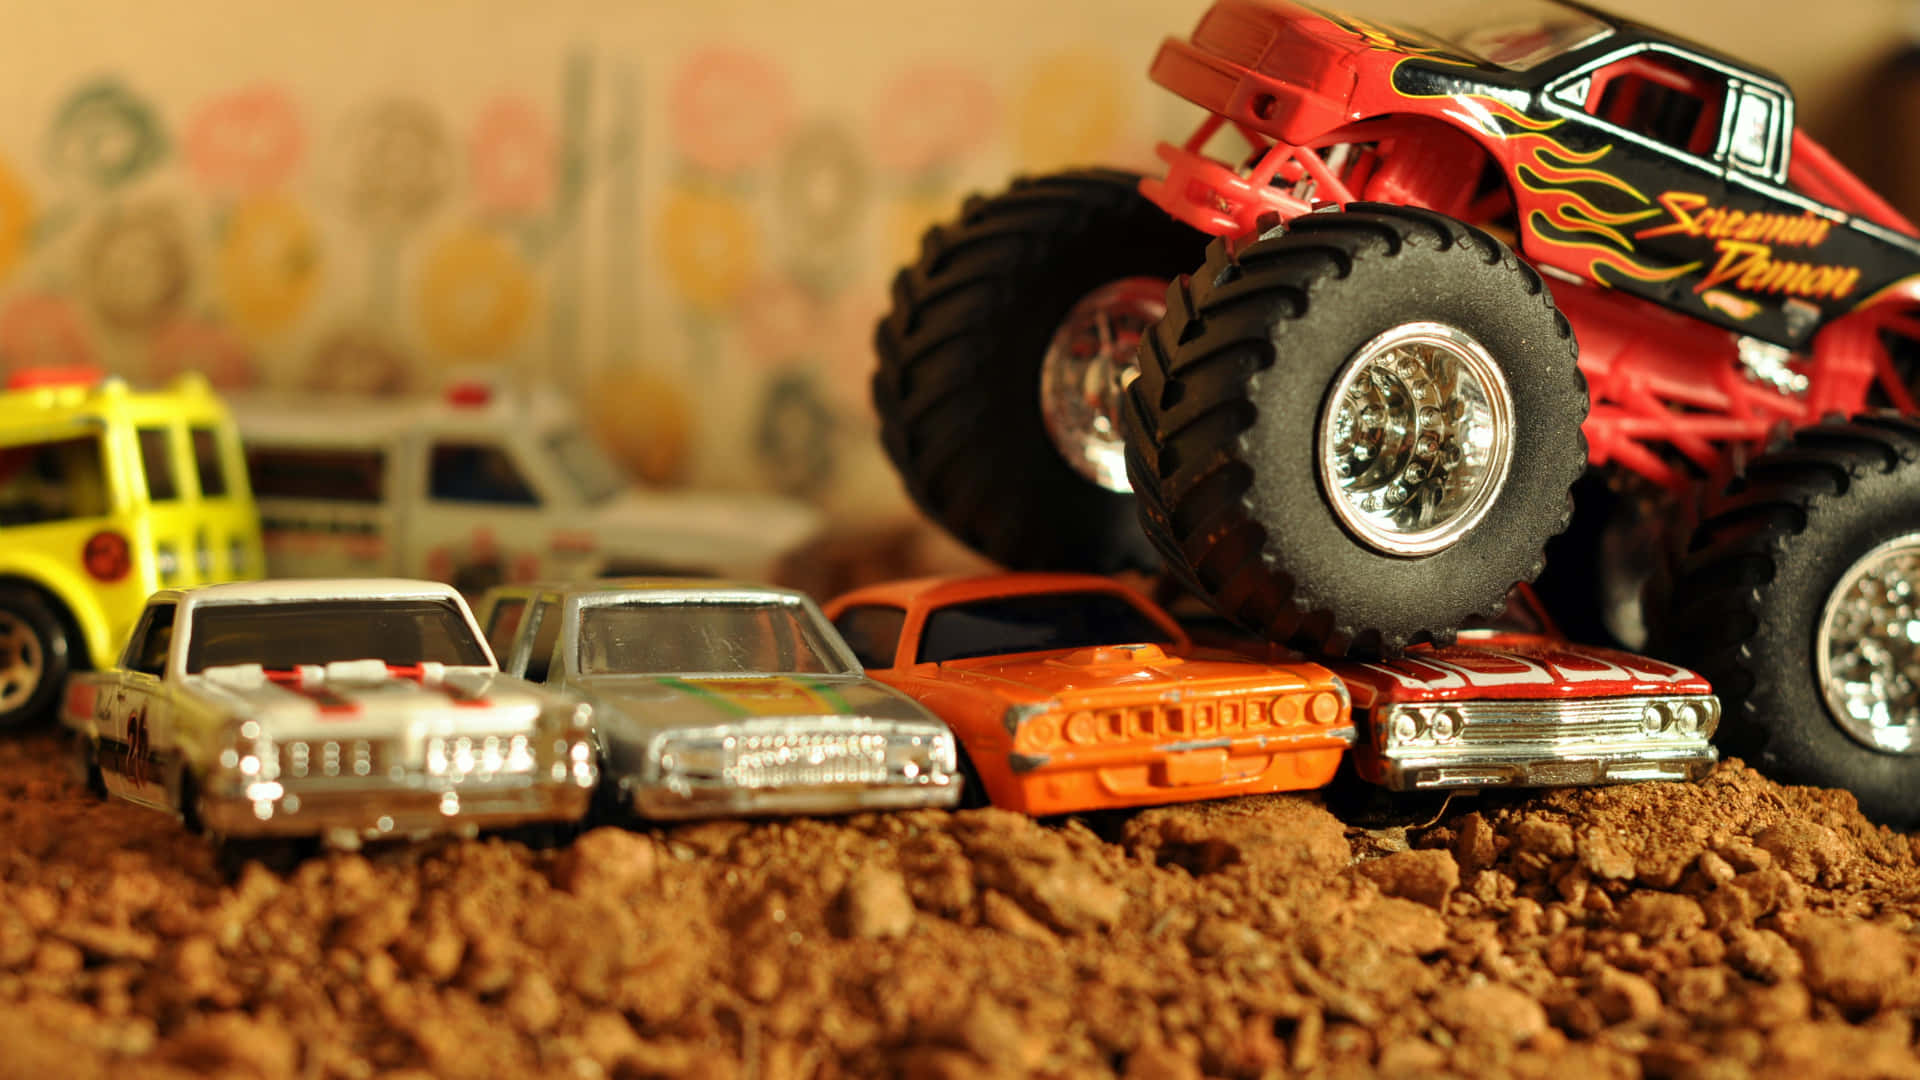 A Toy Monster Truck